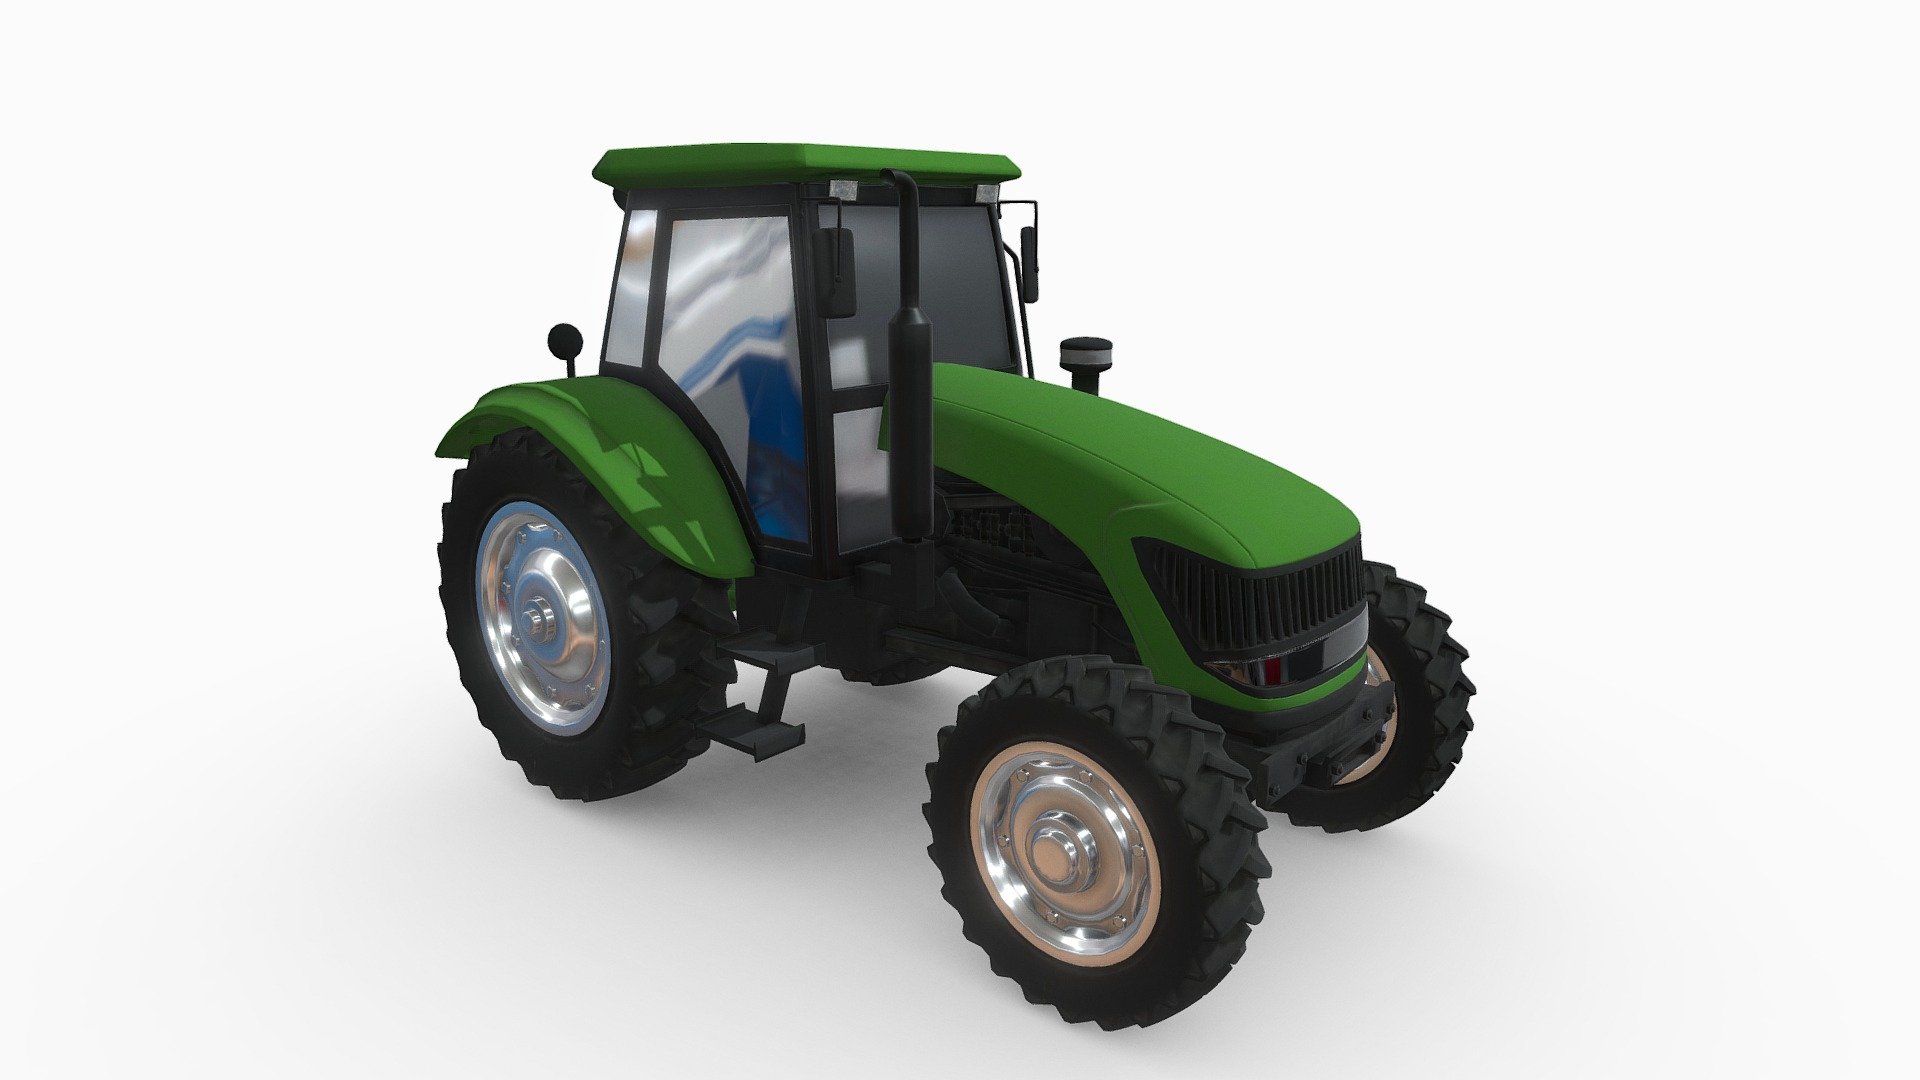 Indian Farmer Tracktor, Largest Selling tractor in India
Created in Maya, textured with Substance Painter 3d model